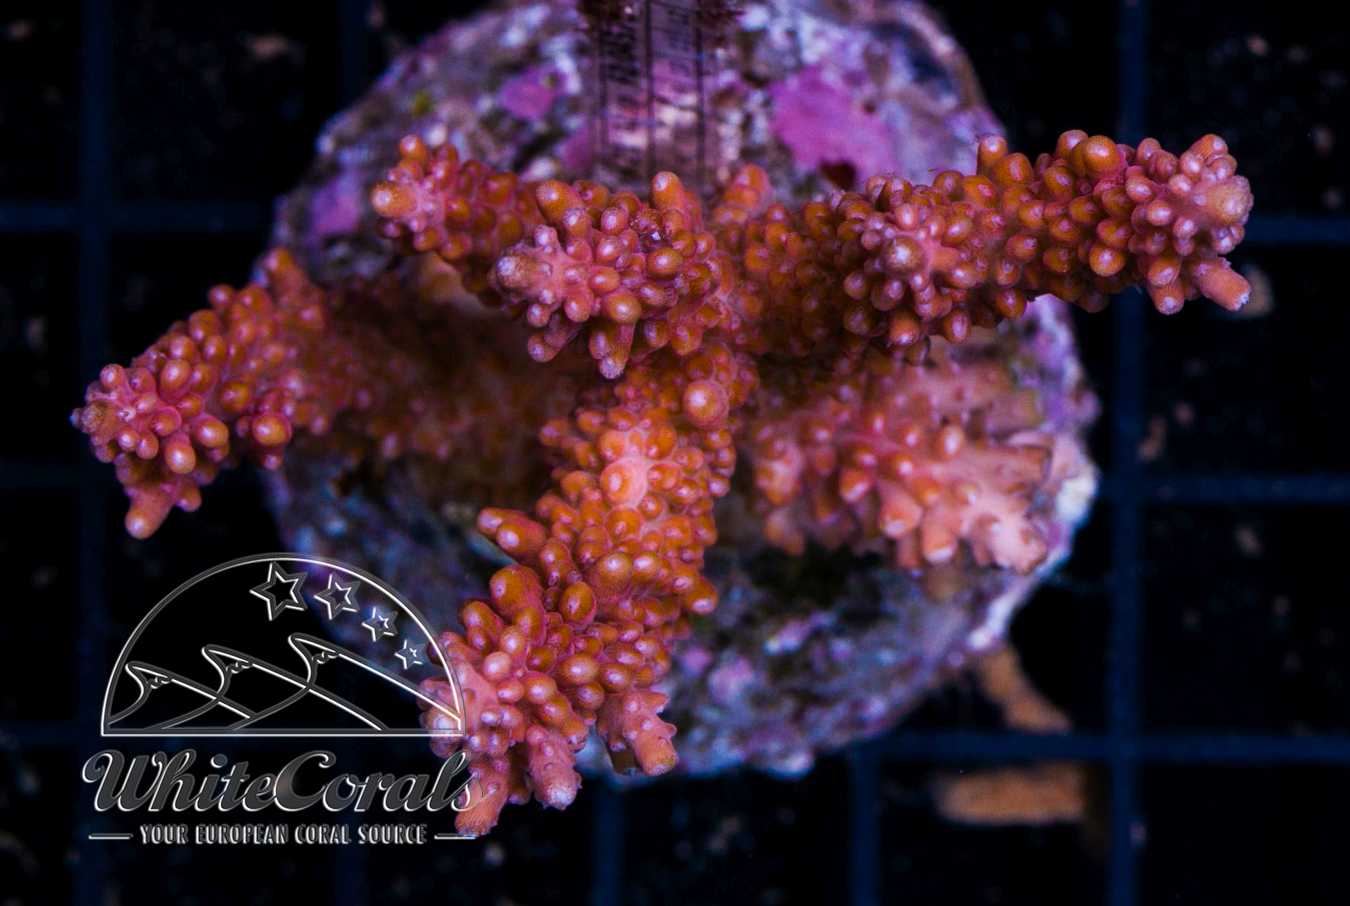 Pikachu acro tck coral awesome acropora aquanerd featured week r2r uc